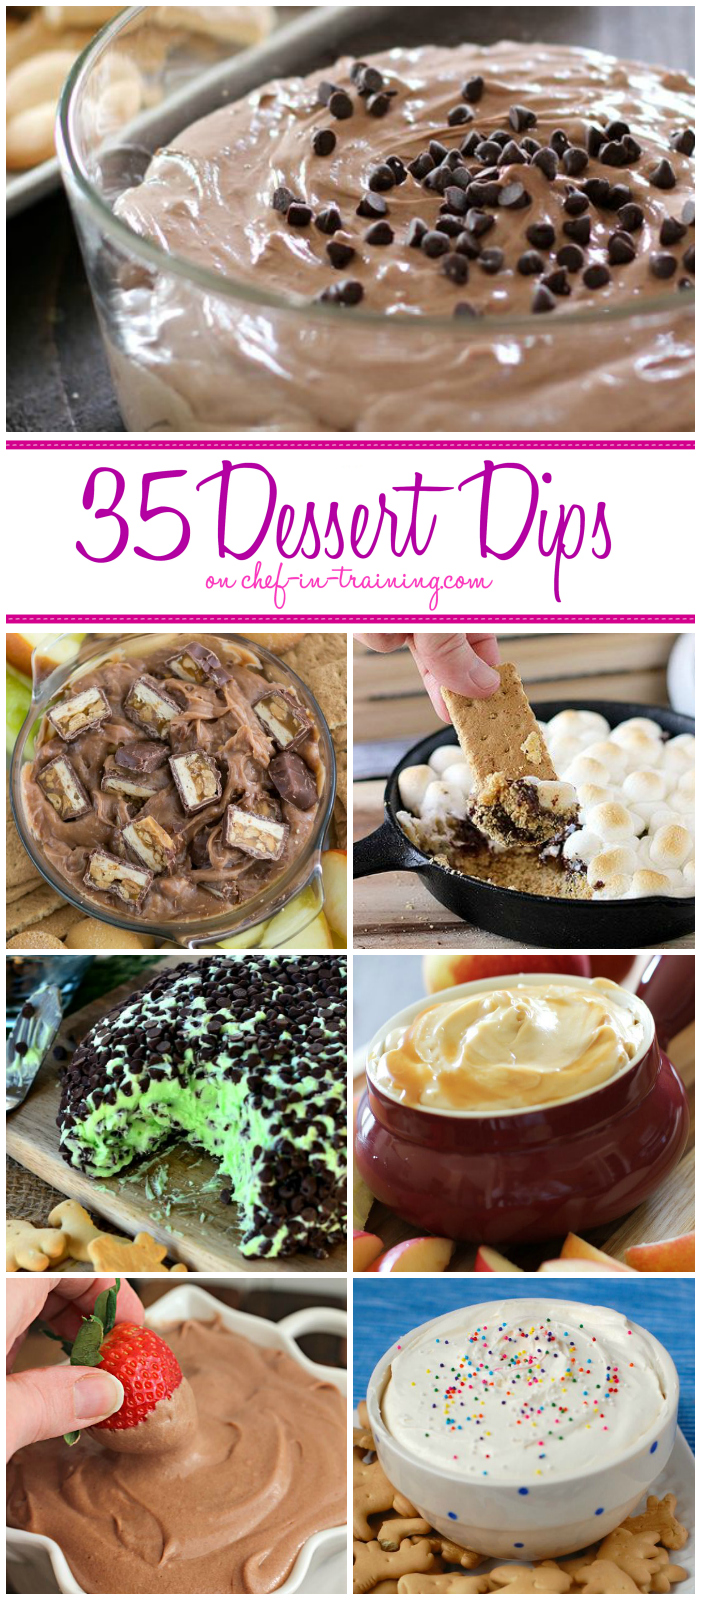 35 Amazing Dessert Dips on chef-in-training.com ...The perfect way to indulge in something sweet! Each of these dips sounds amazing!